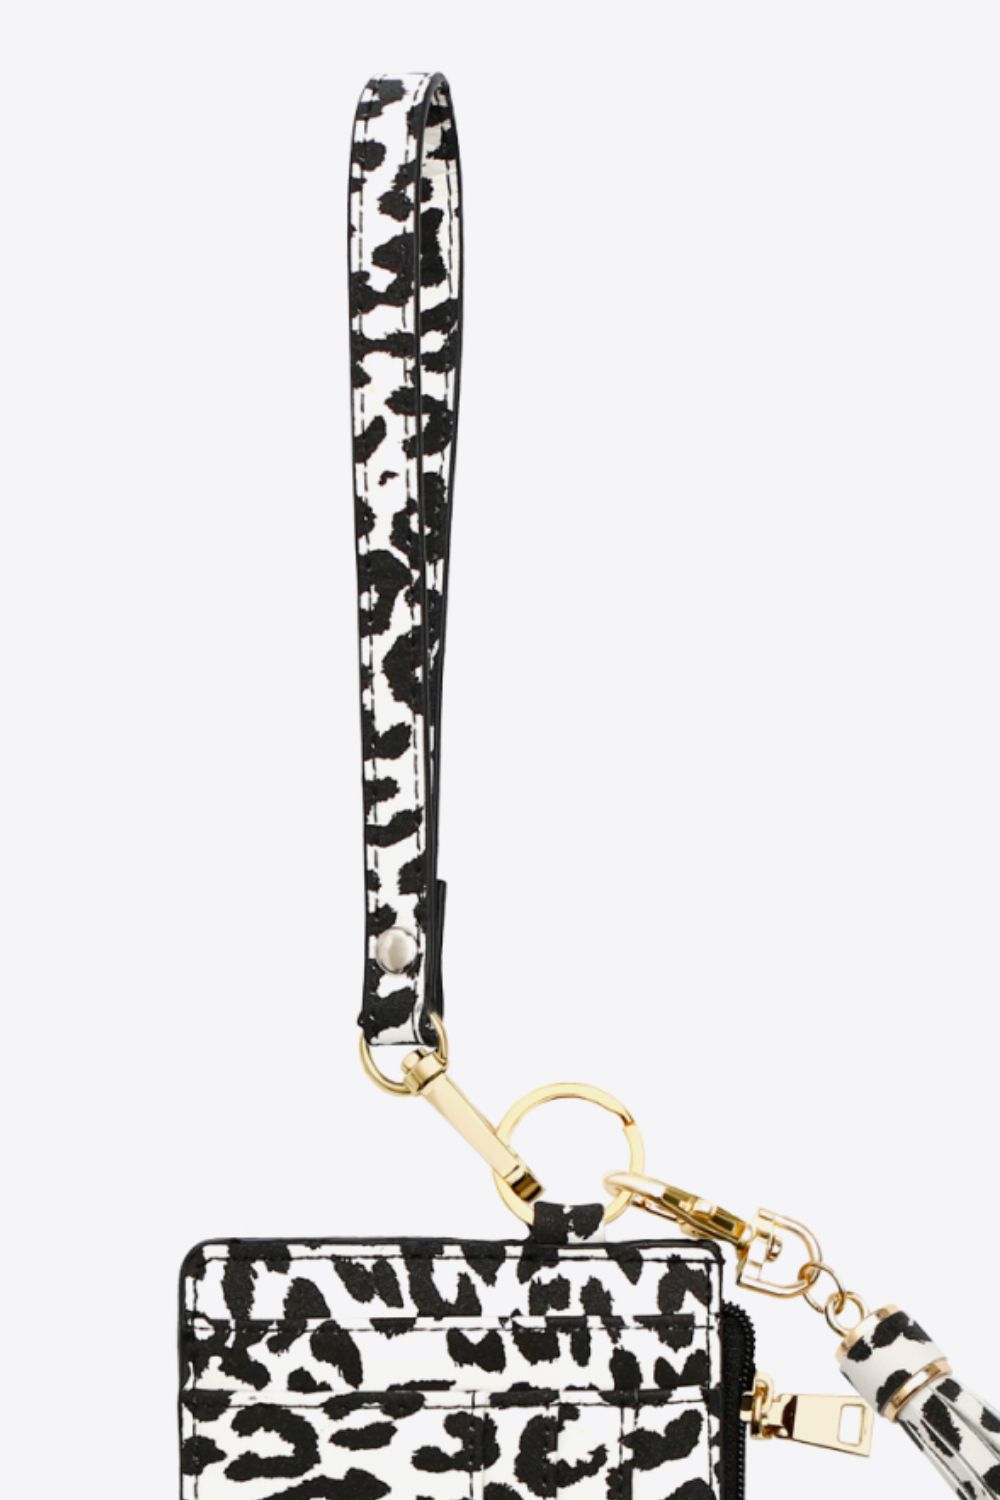 Printed Tassel Keychain with Wallet